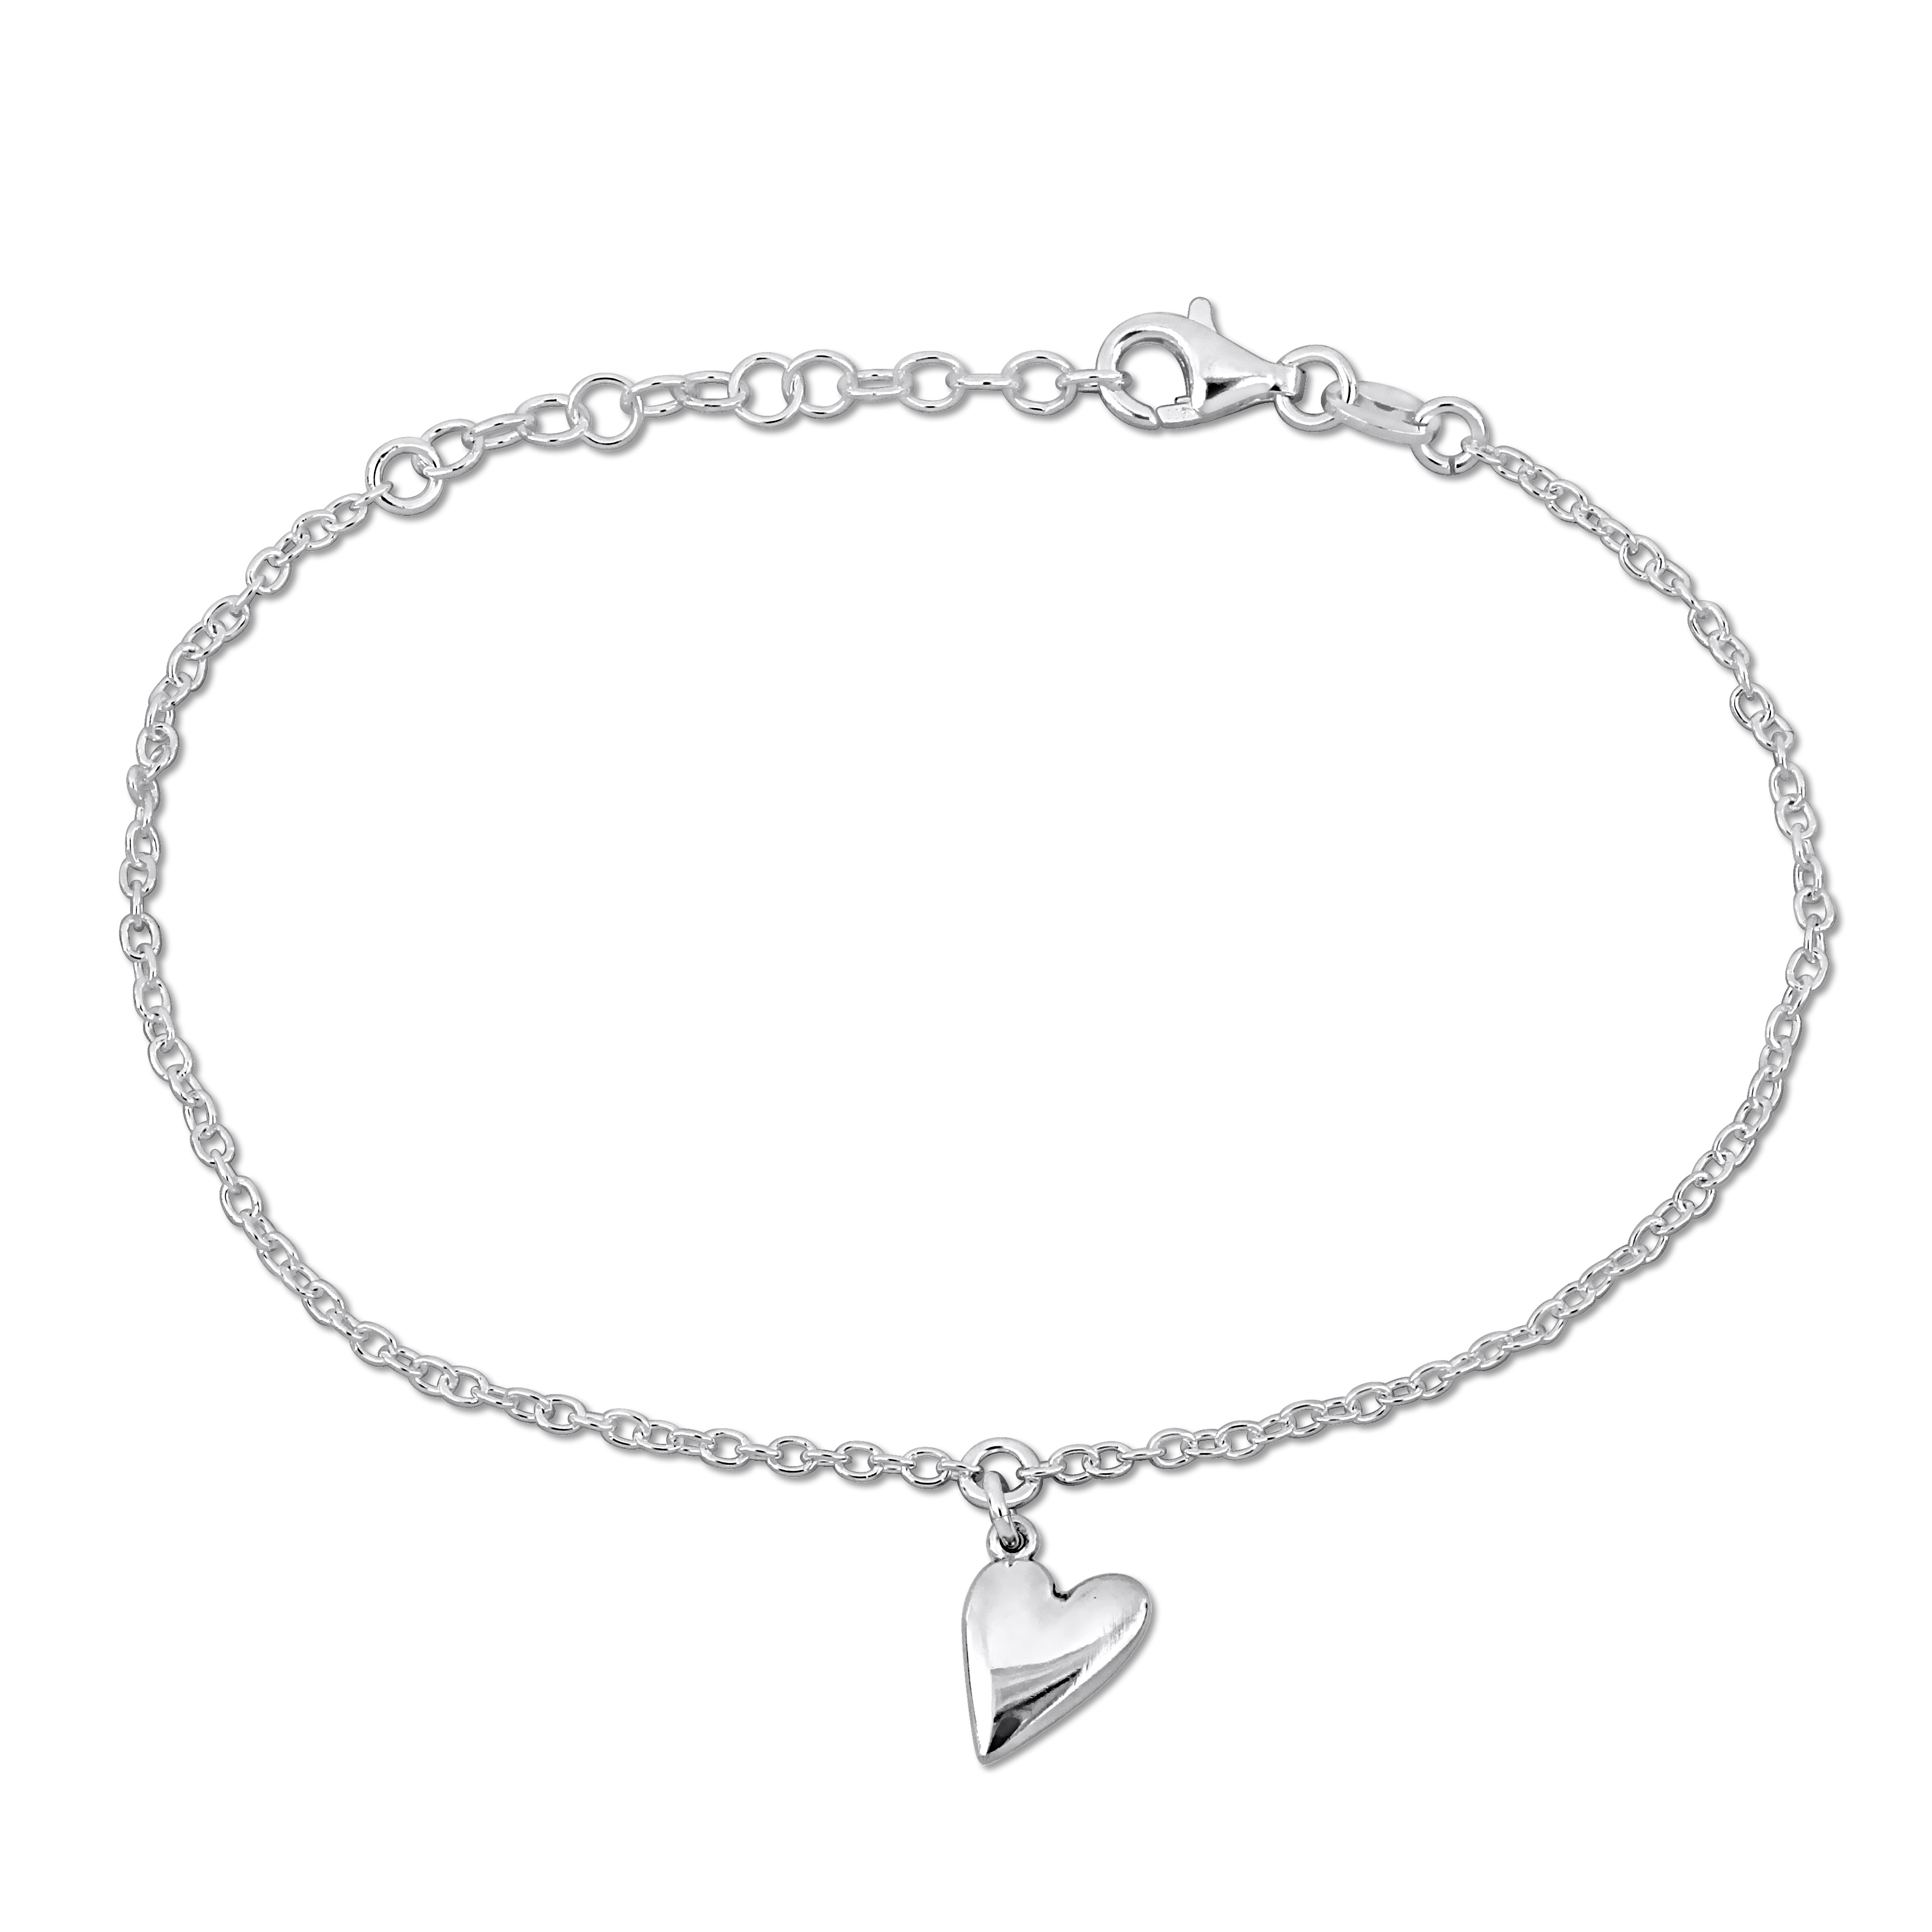 Heart Charm Bracelet on Cable Chain in Sterling Silver - 6.5+1 in.